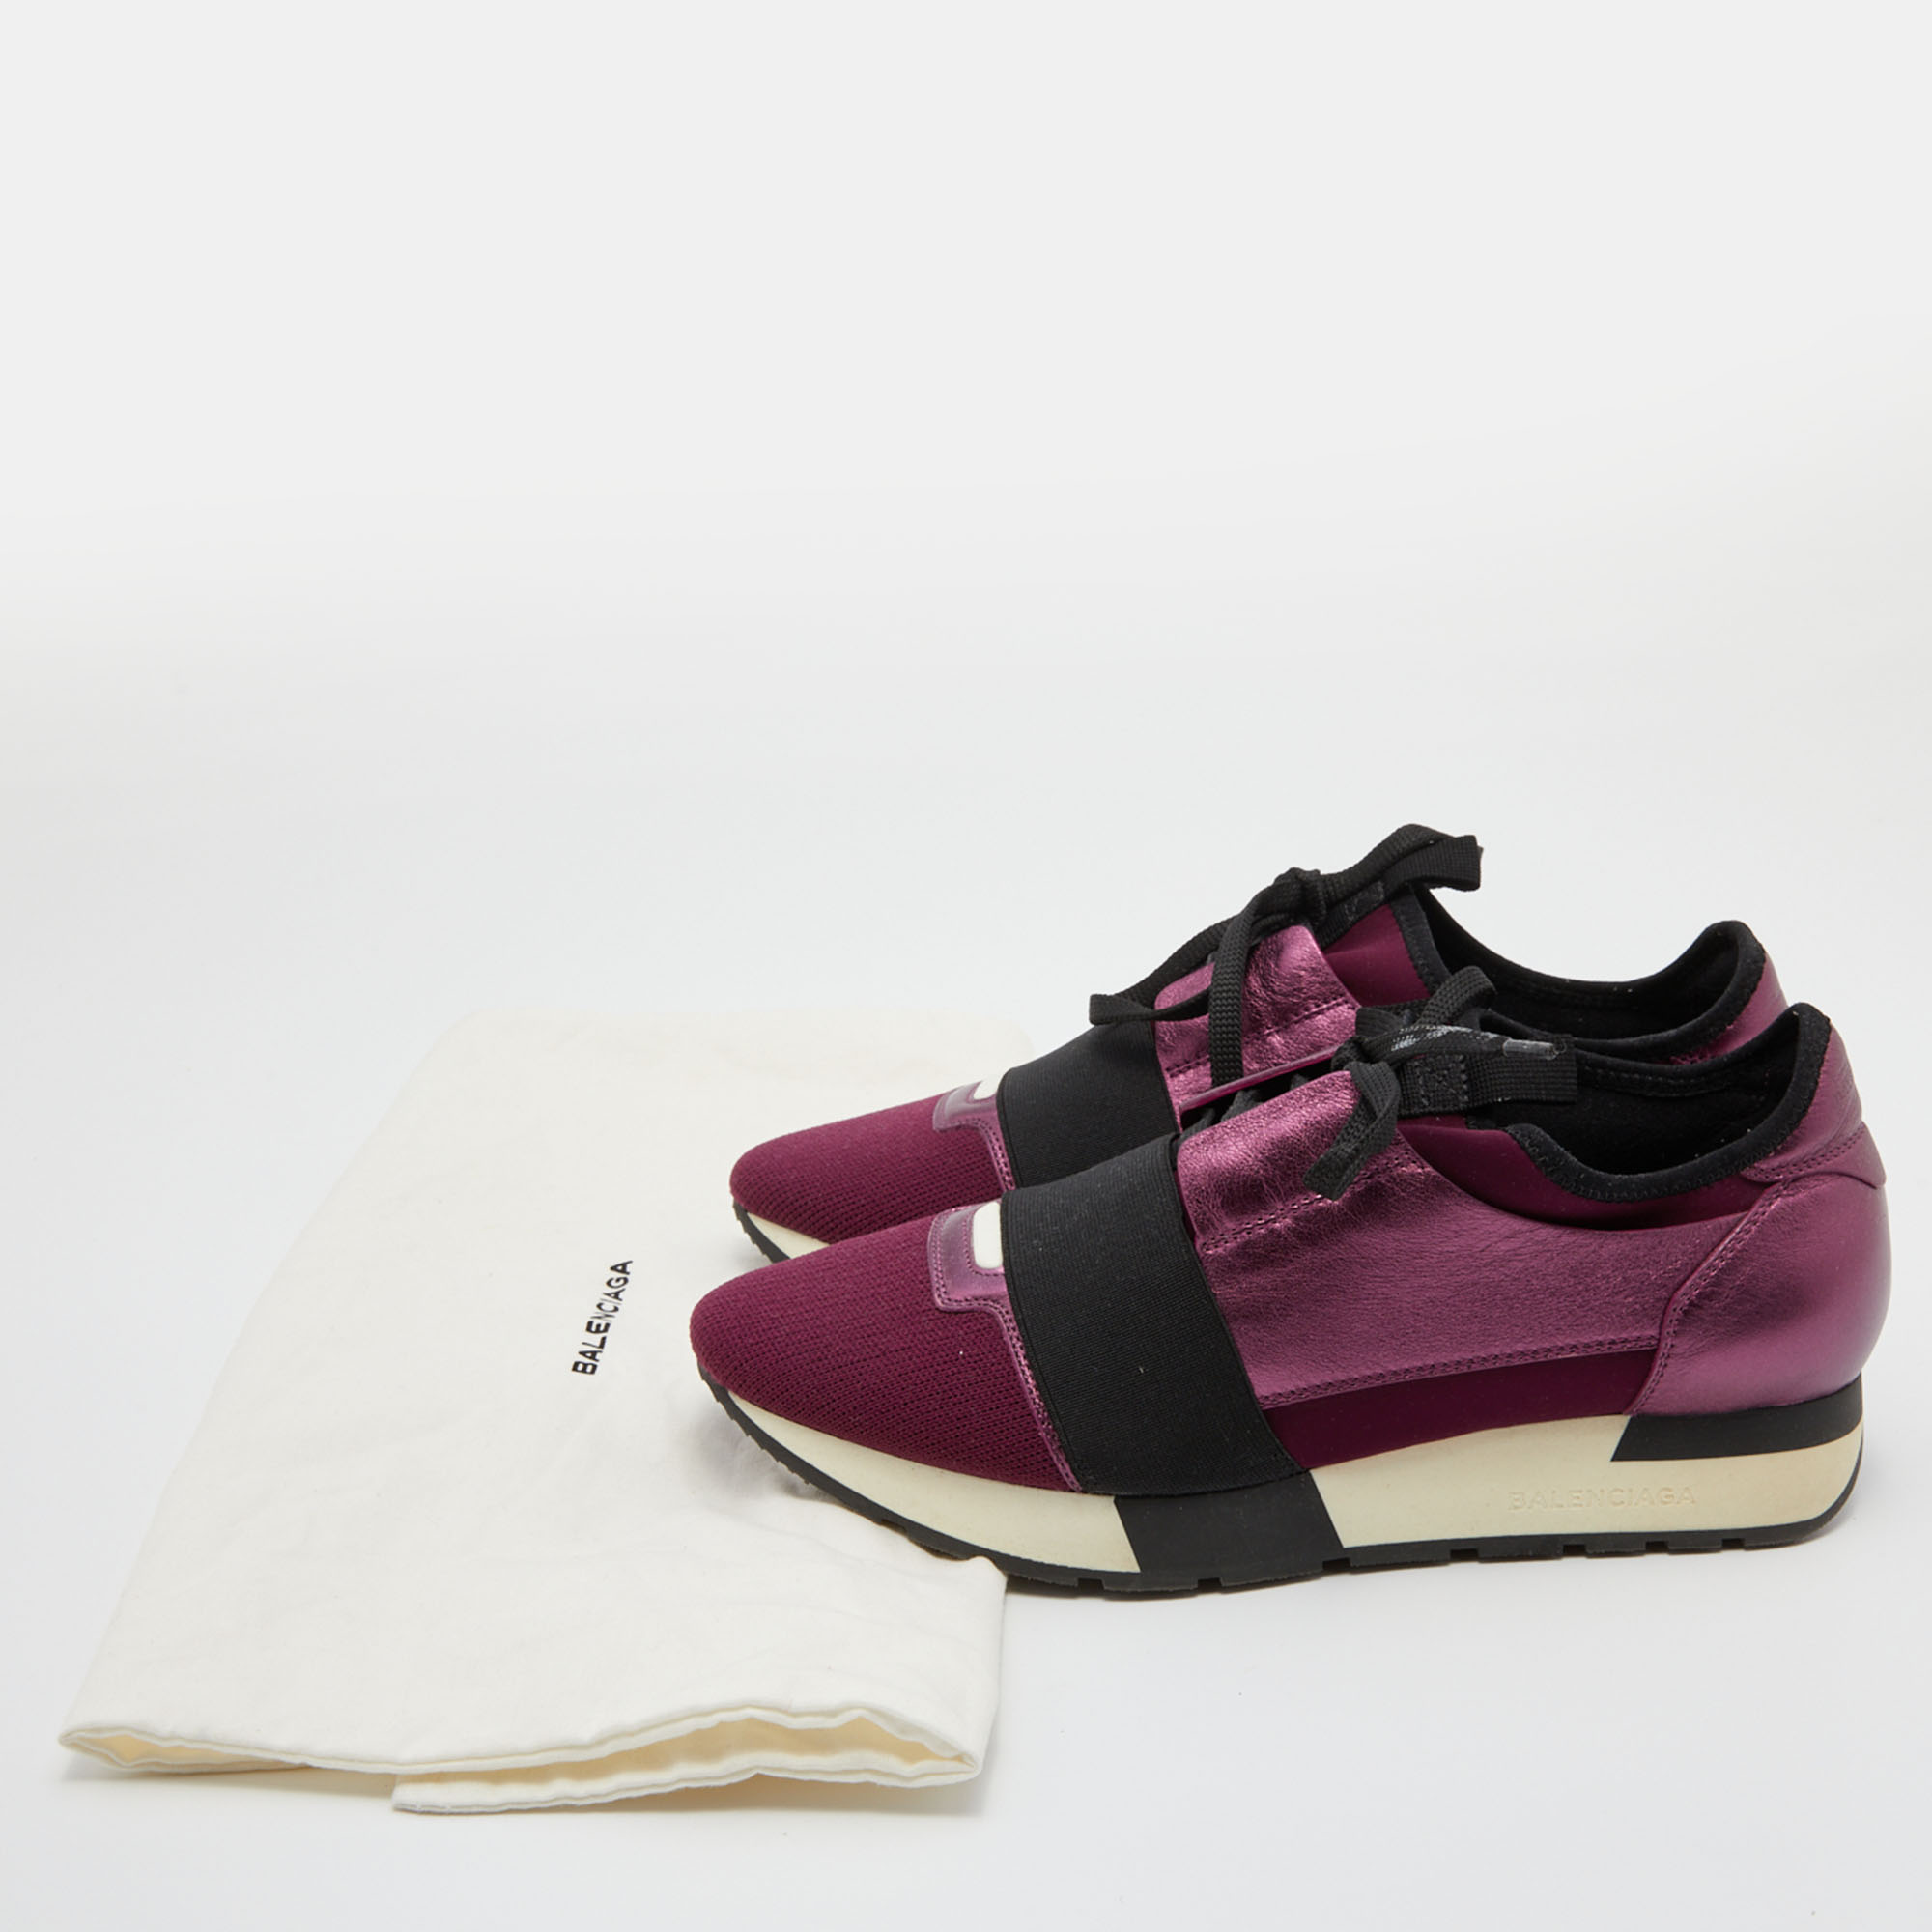 Balenciaga Plum/Black Leather And Stretch Fabric Race Runner Sneakers Size 38